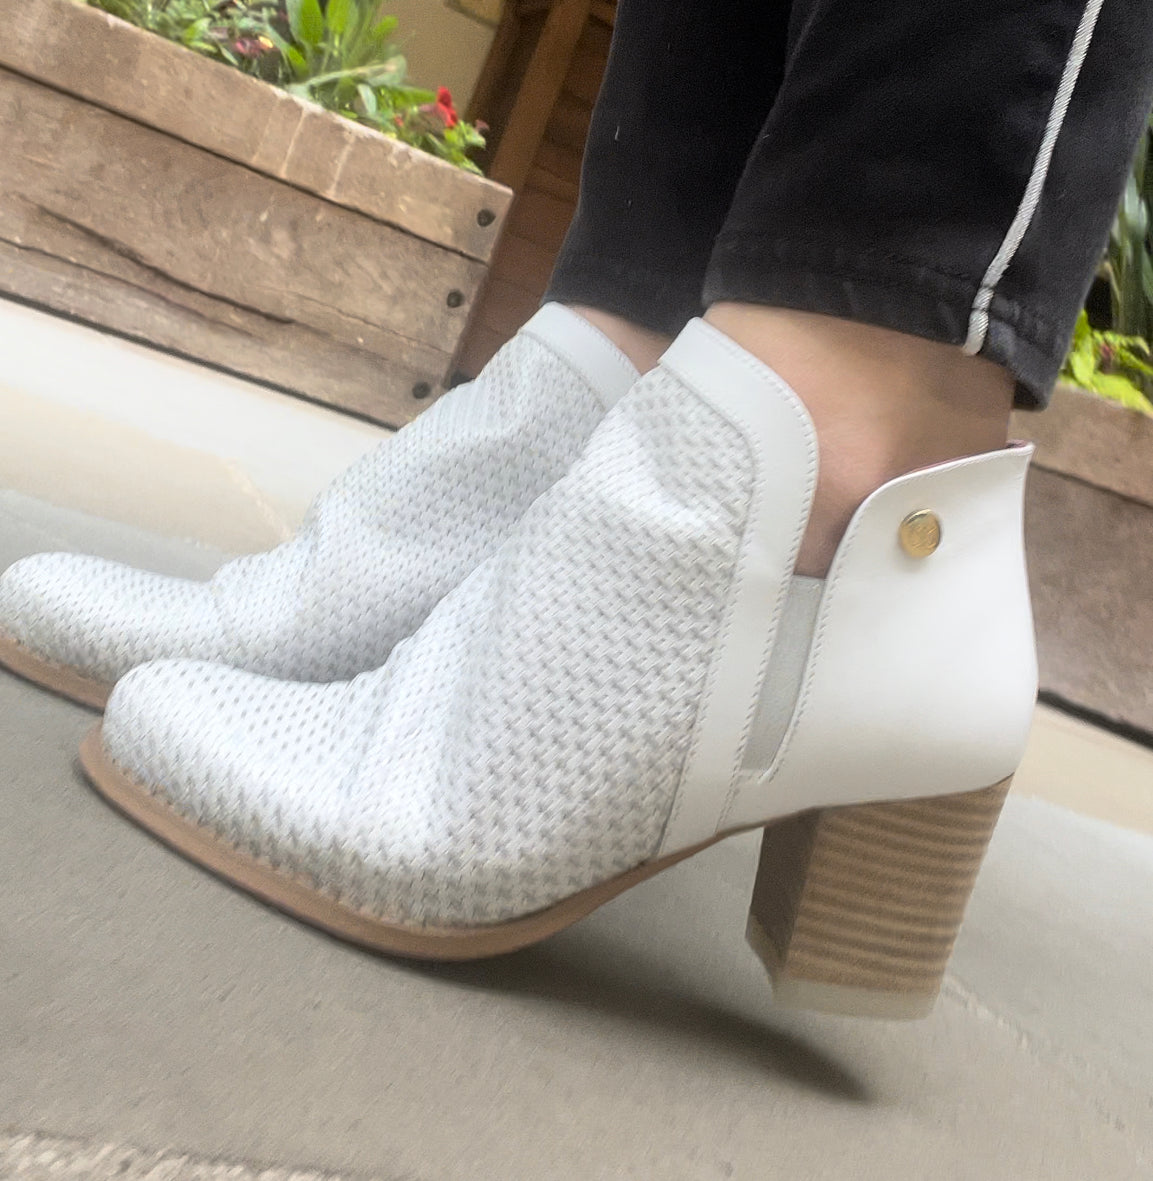 Plume - White Shimmer ankle boot